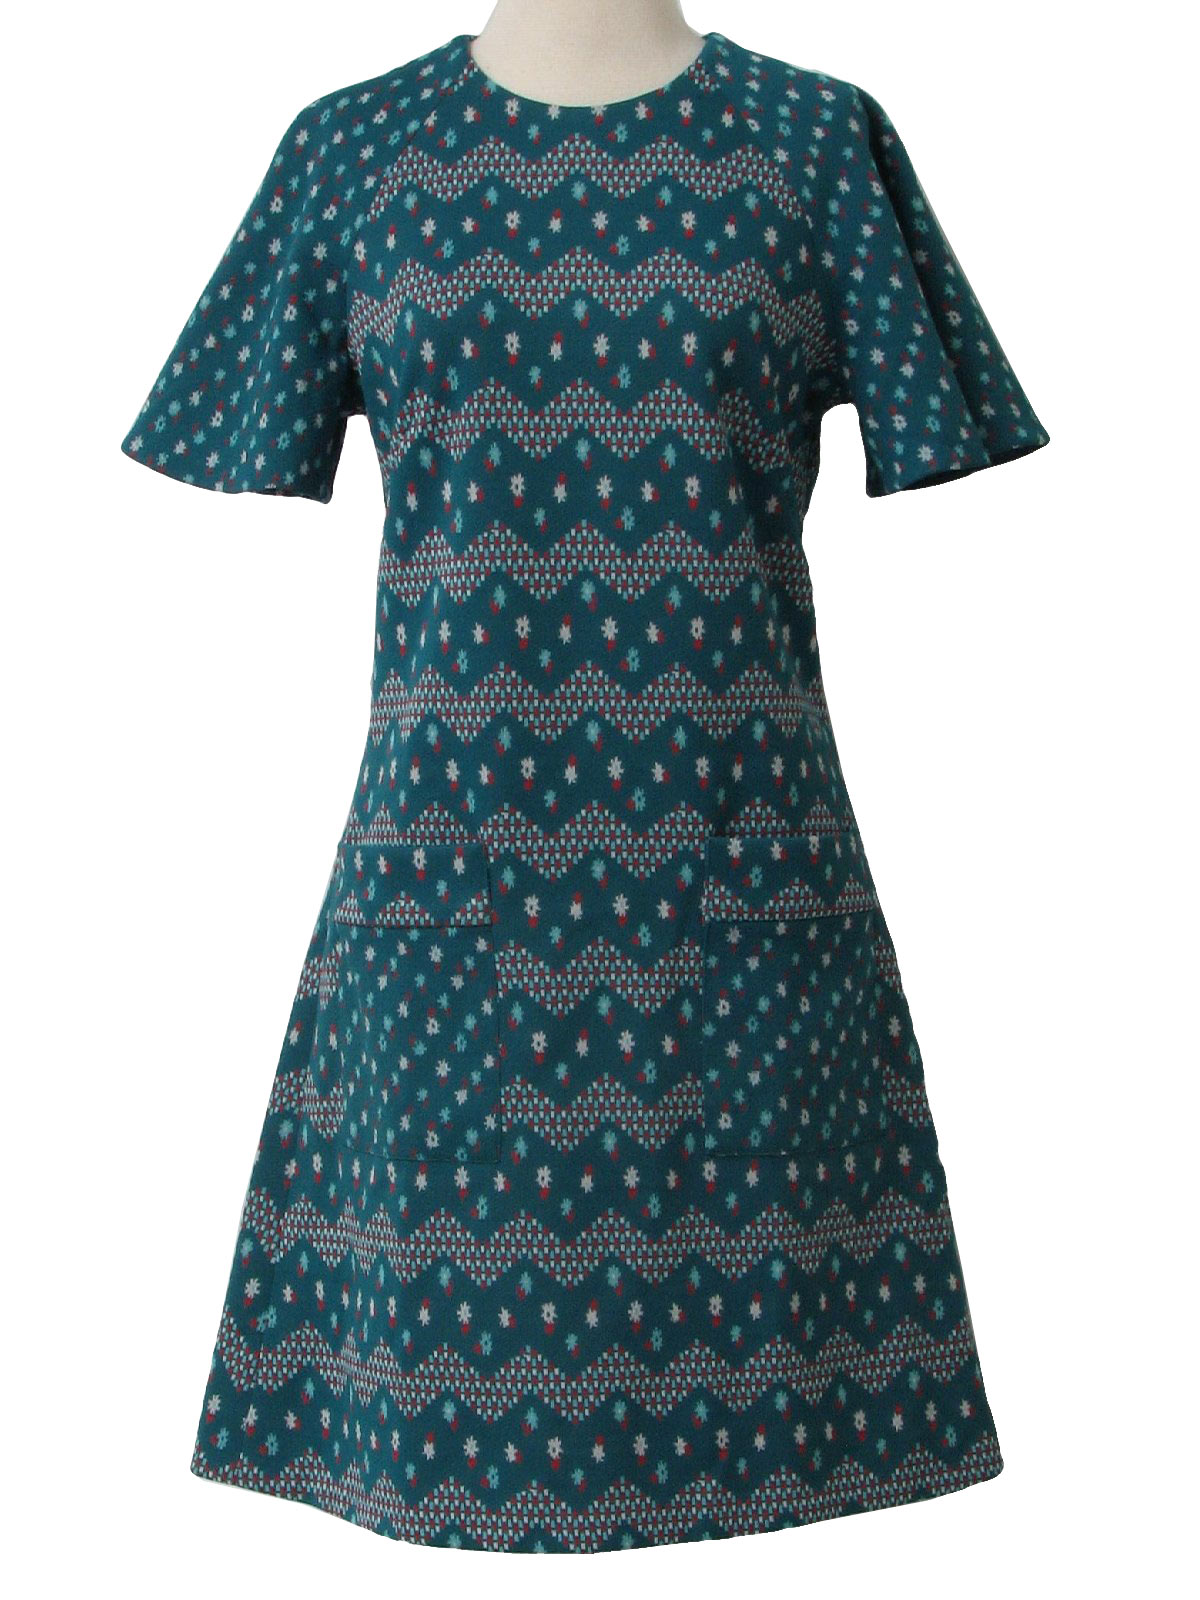 Retro 1960s Dress: 60s -Home Sewn- Womens teal, red, baby blue and ...